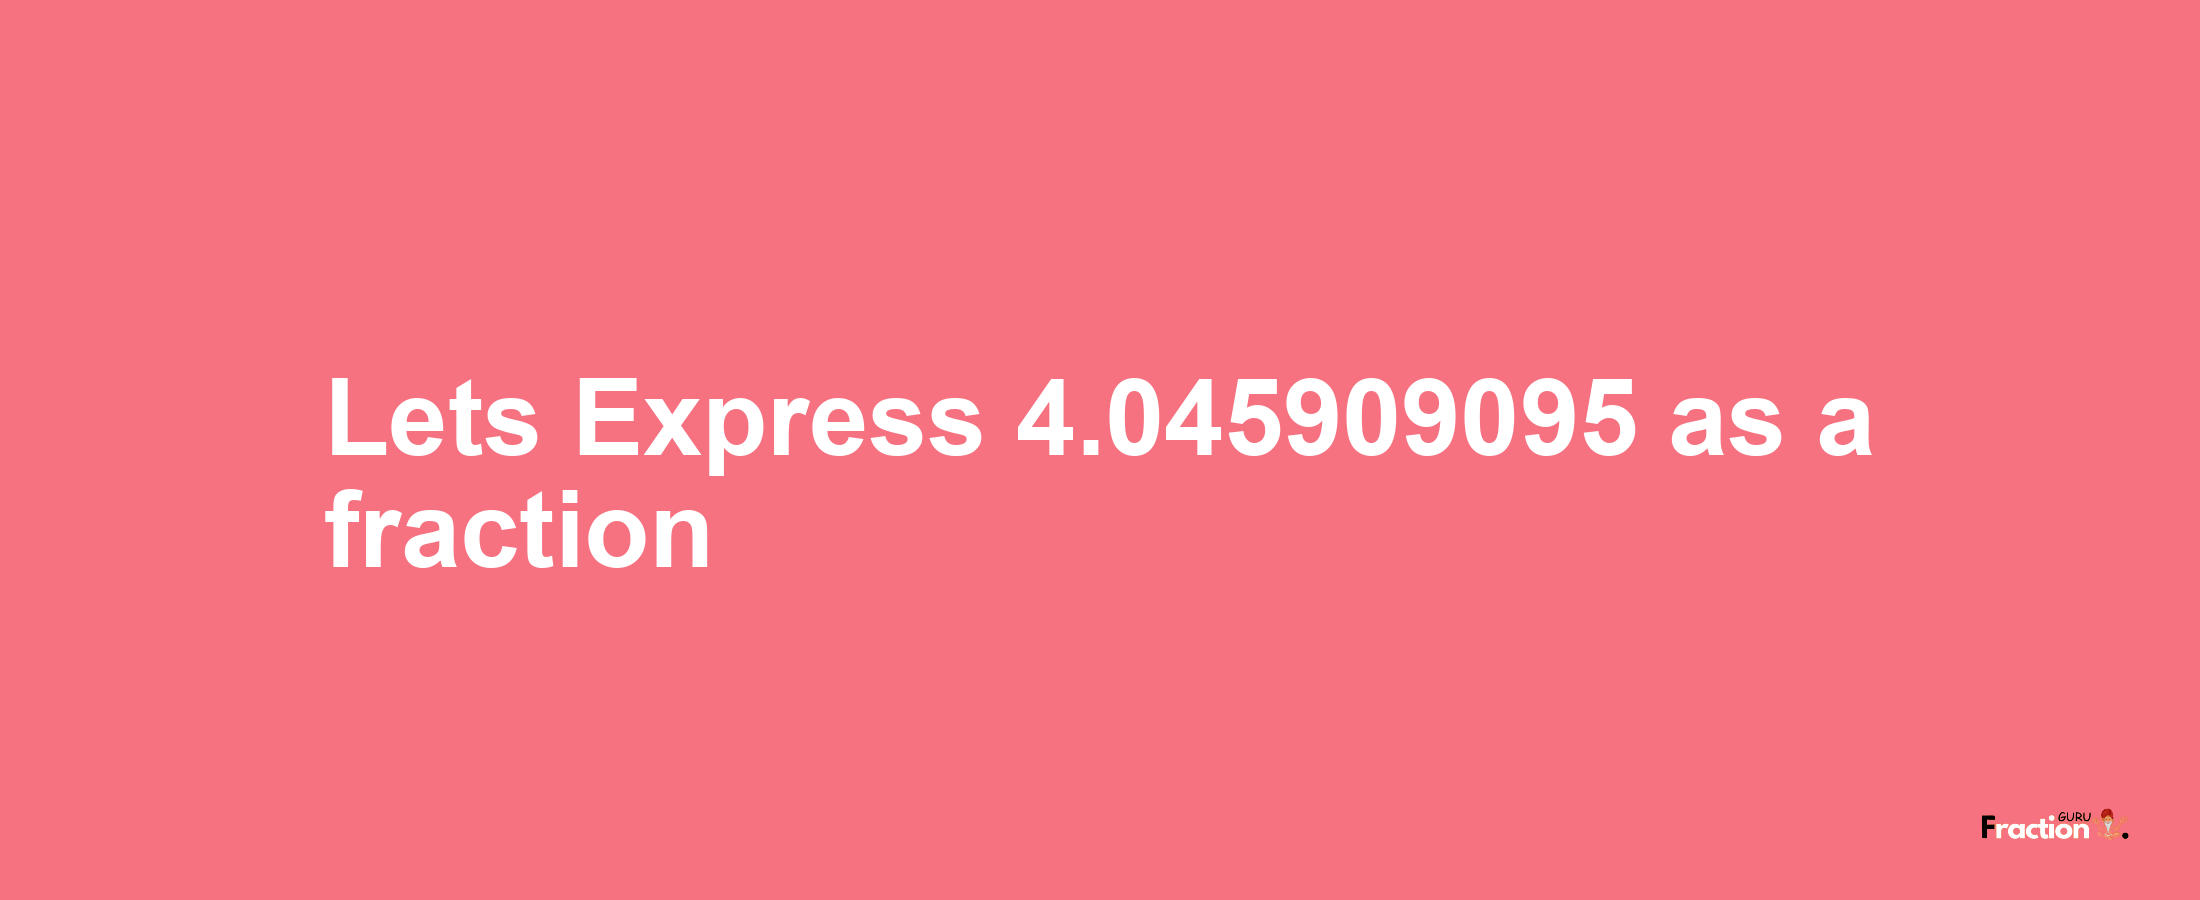 Lets Express 4.045909095 as afraction